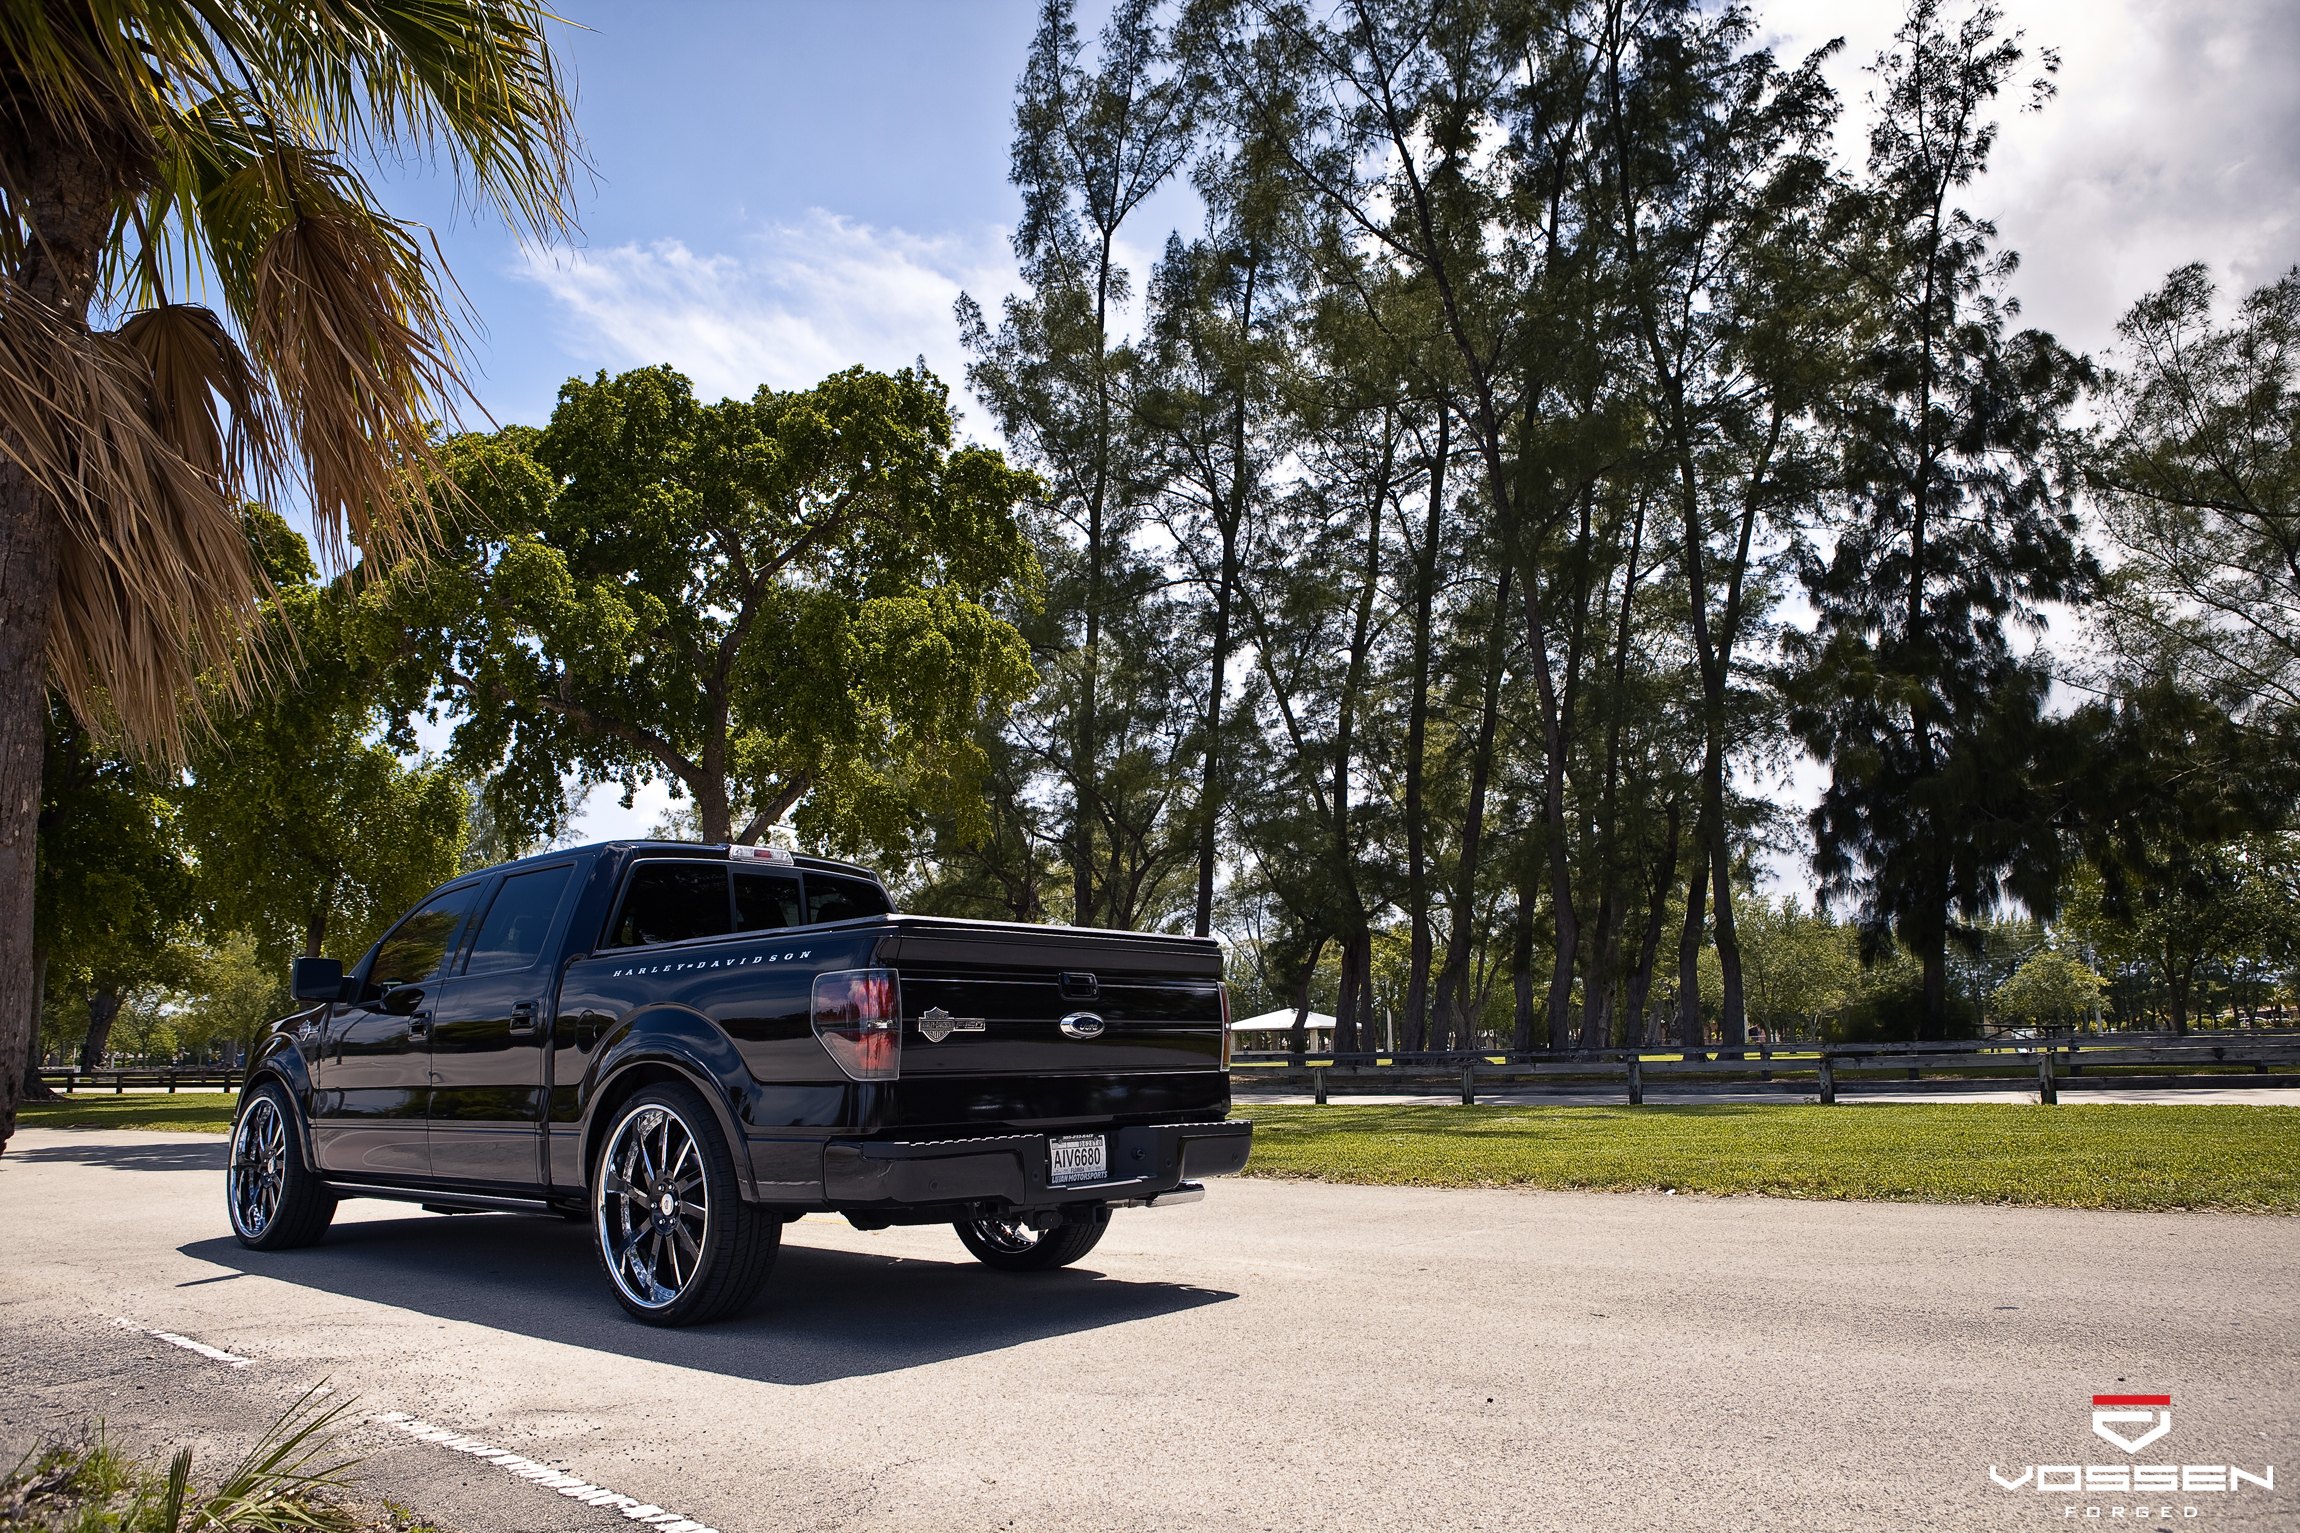 Forged Vossen Rims on Black Ford F-150 - Photo by Vossen